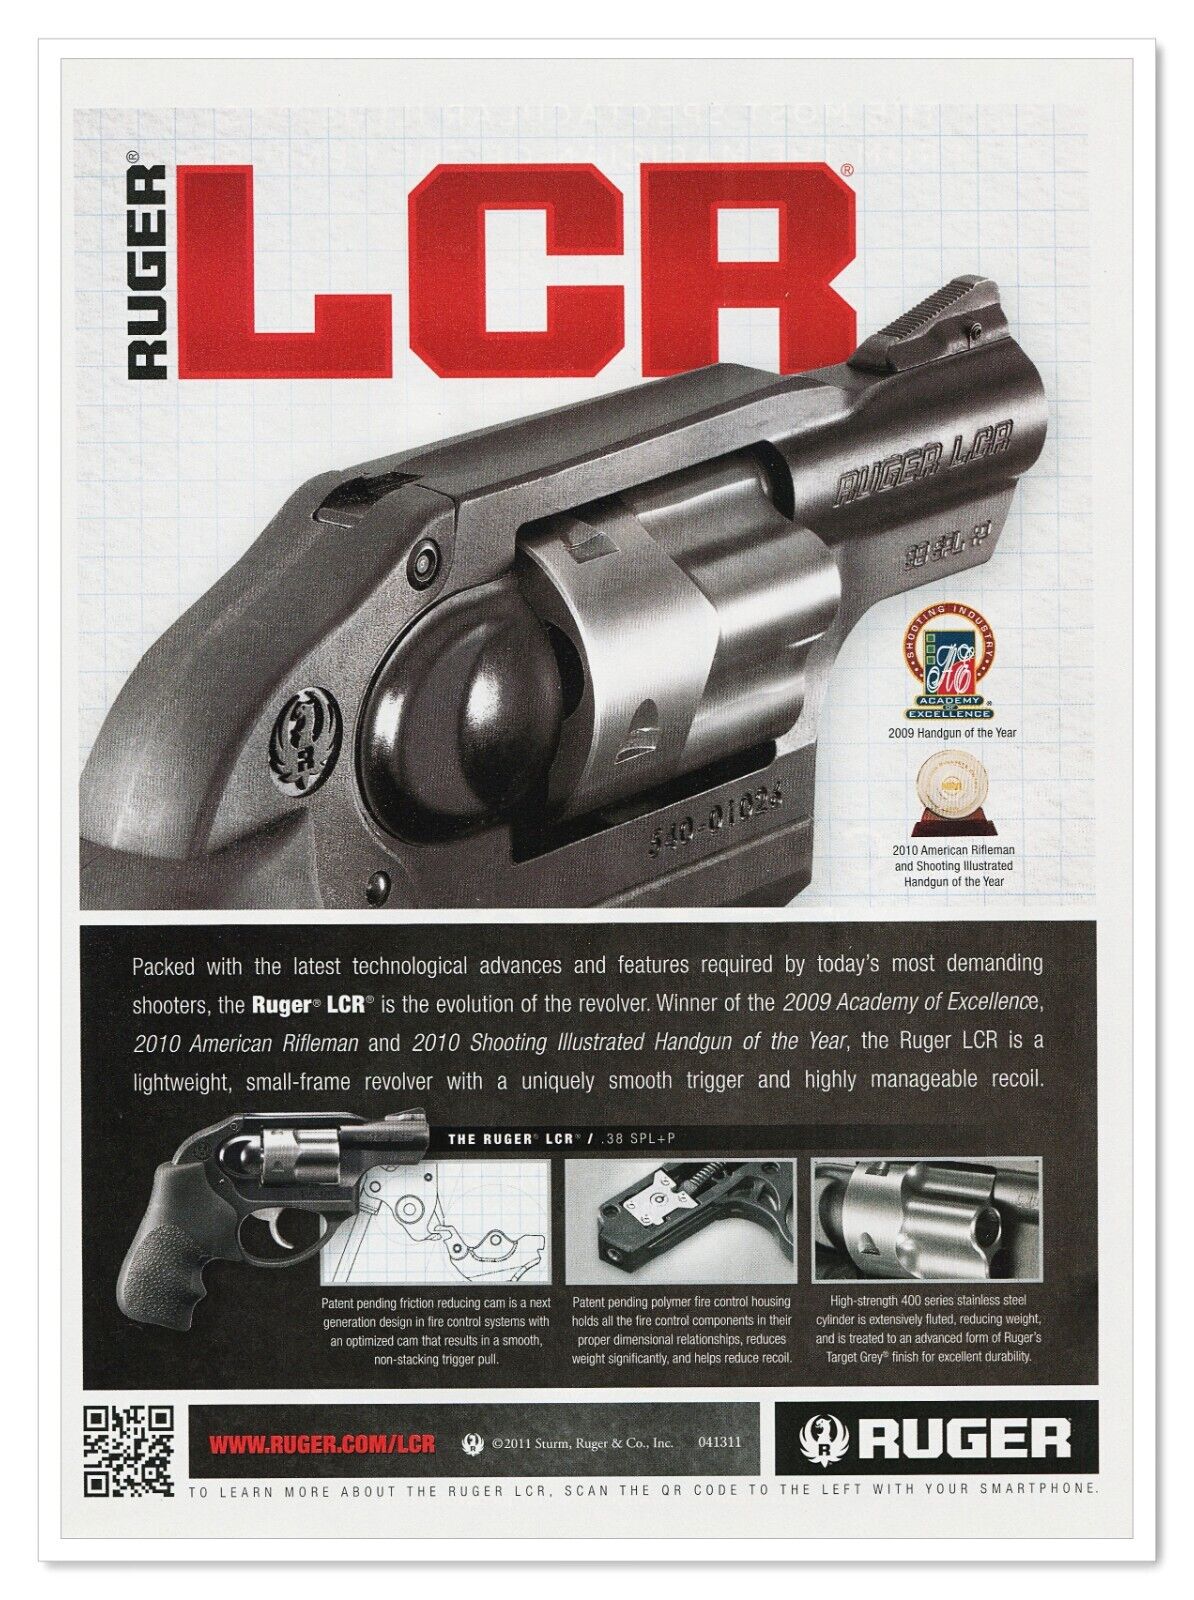 Ruger Firearms LCR Revolver 2011 Full-Page Print Magazine Handgun Ad